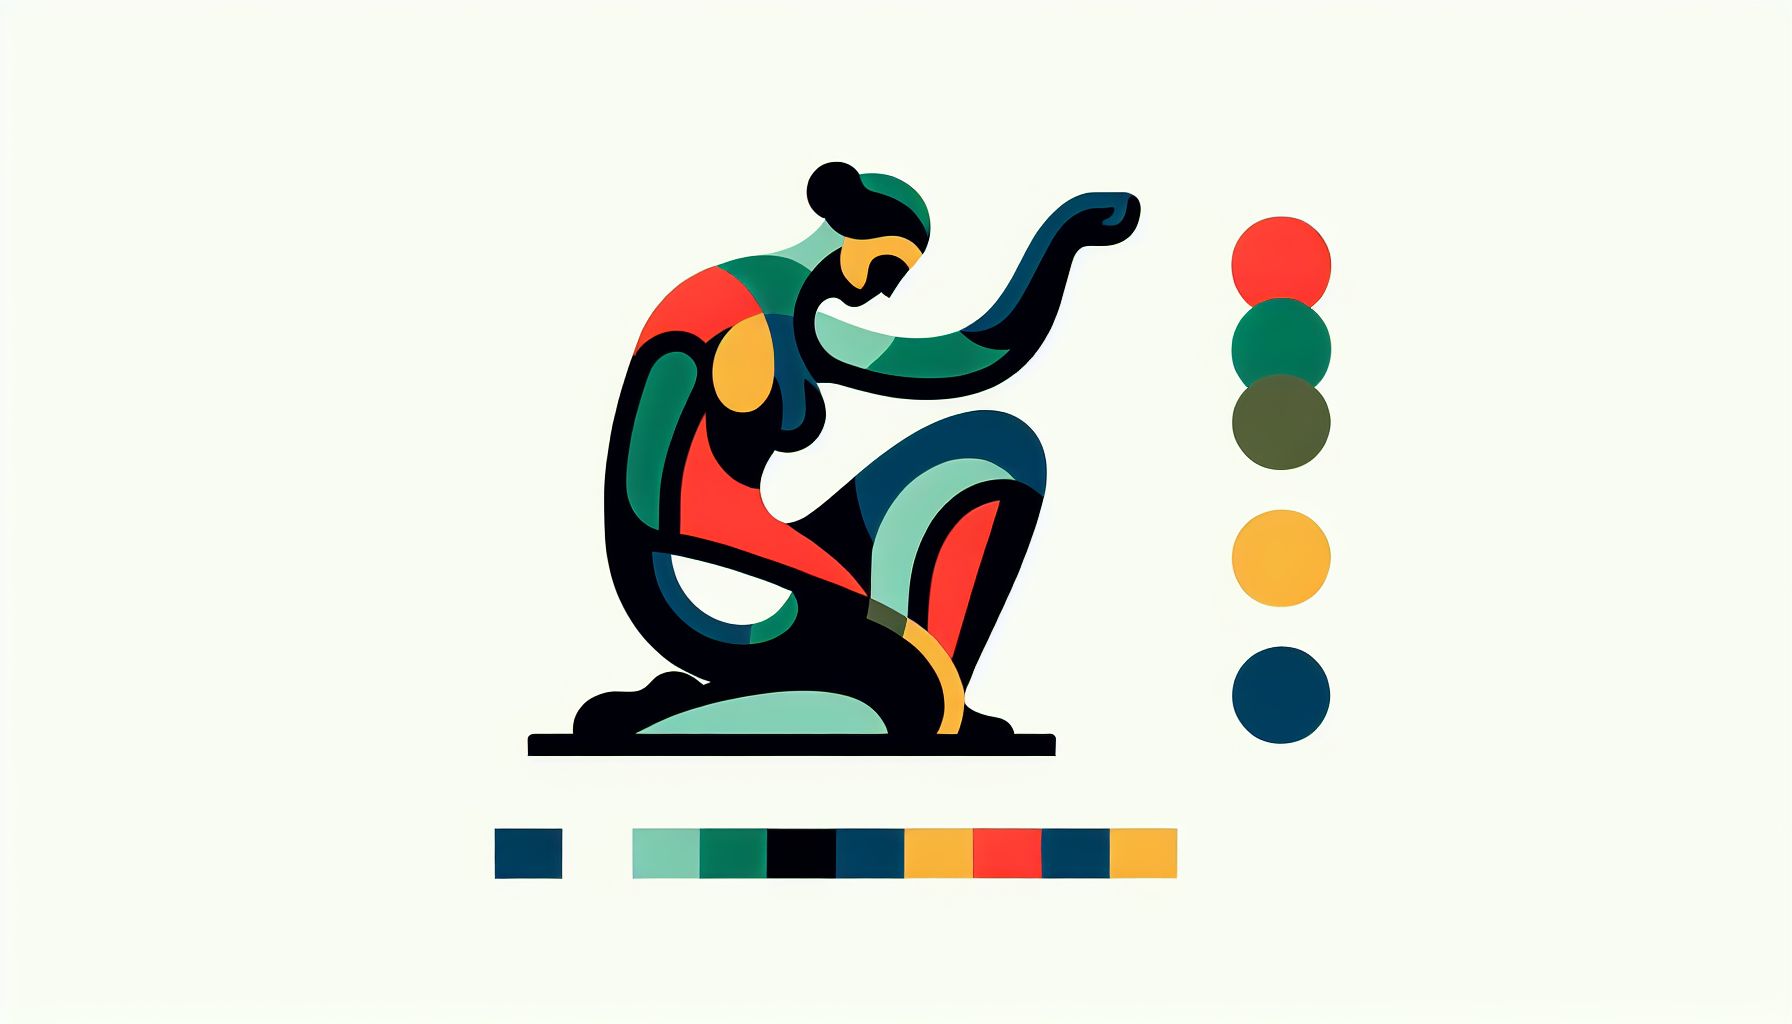 Sculpture in flat illustration style and white background, red #f47574, green #88c7a8, yellow #fcc44b, and blue #645bc8 colors.